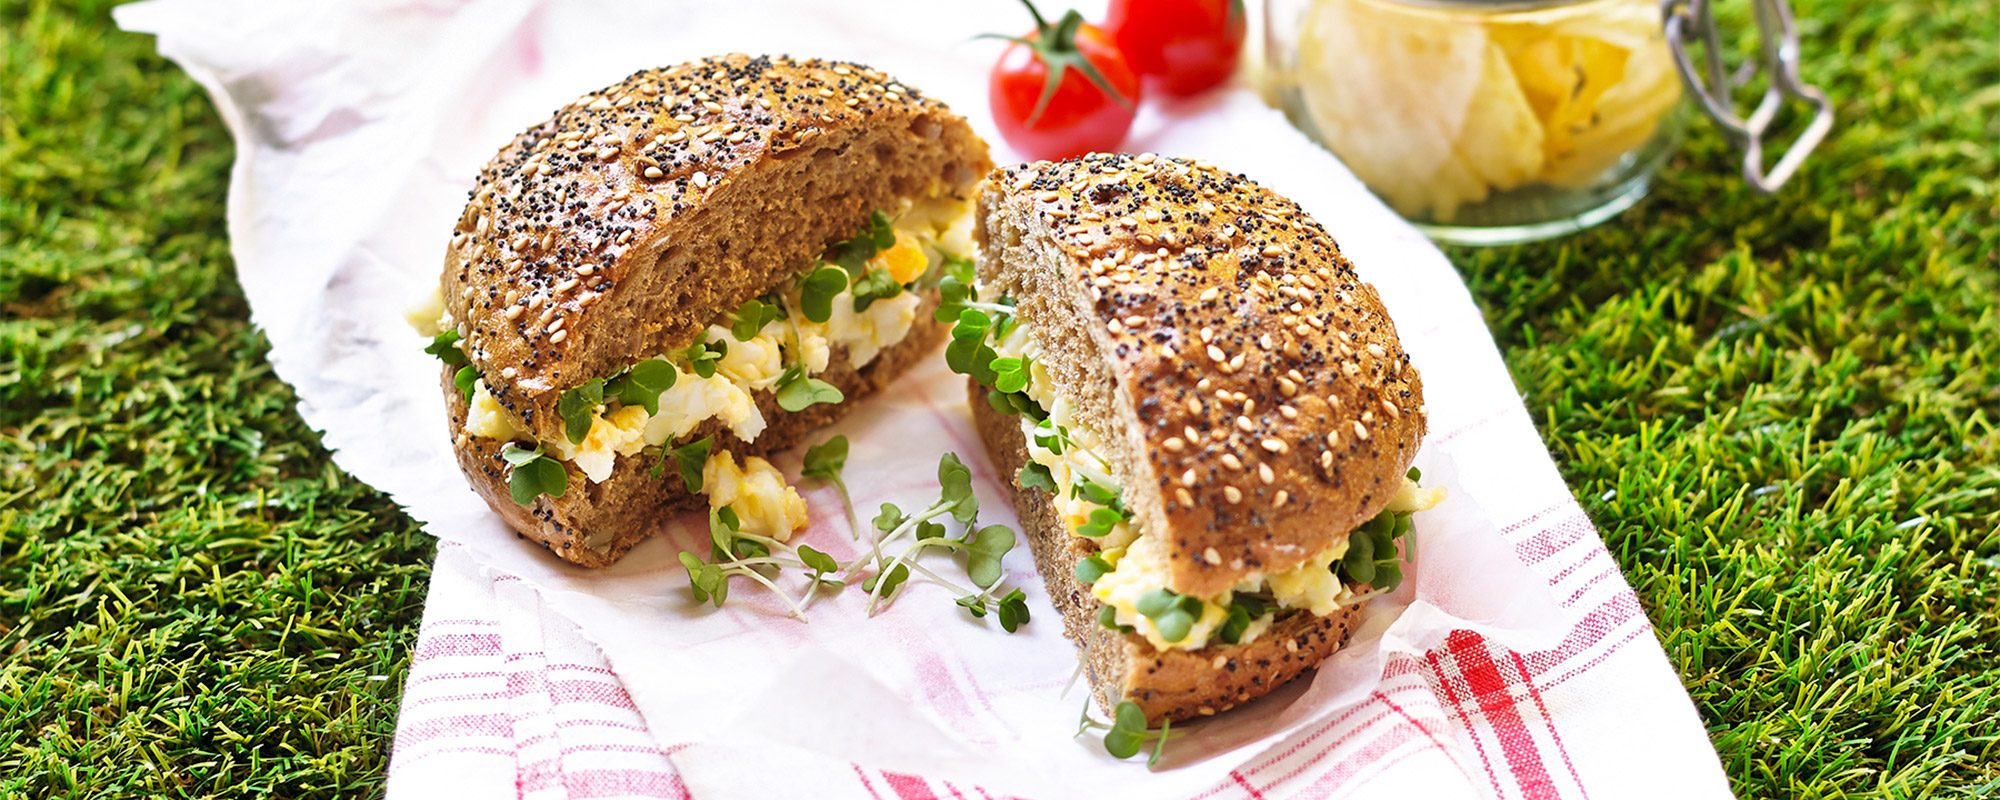 Egg Mayonnaise and Salad Cress Seeded Rolls